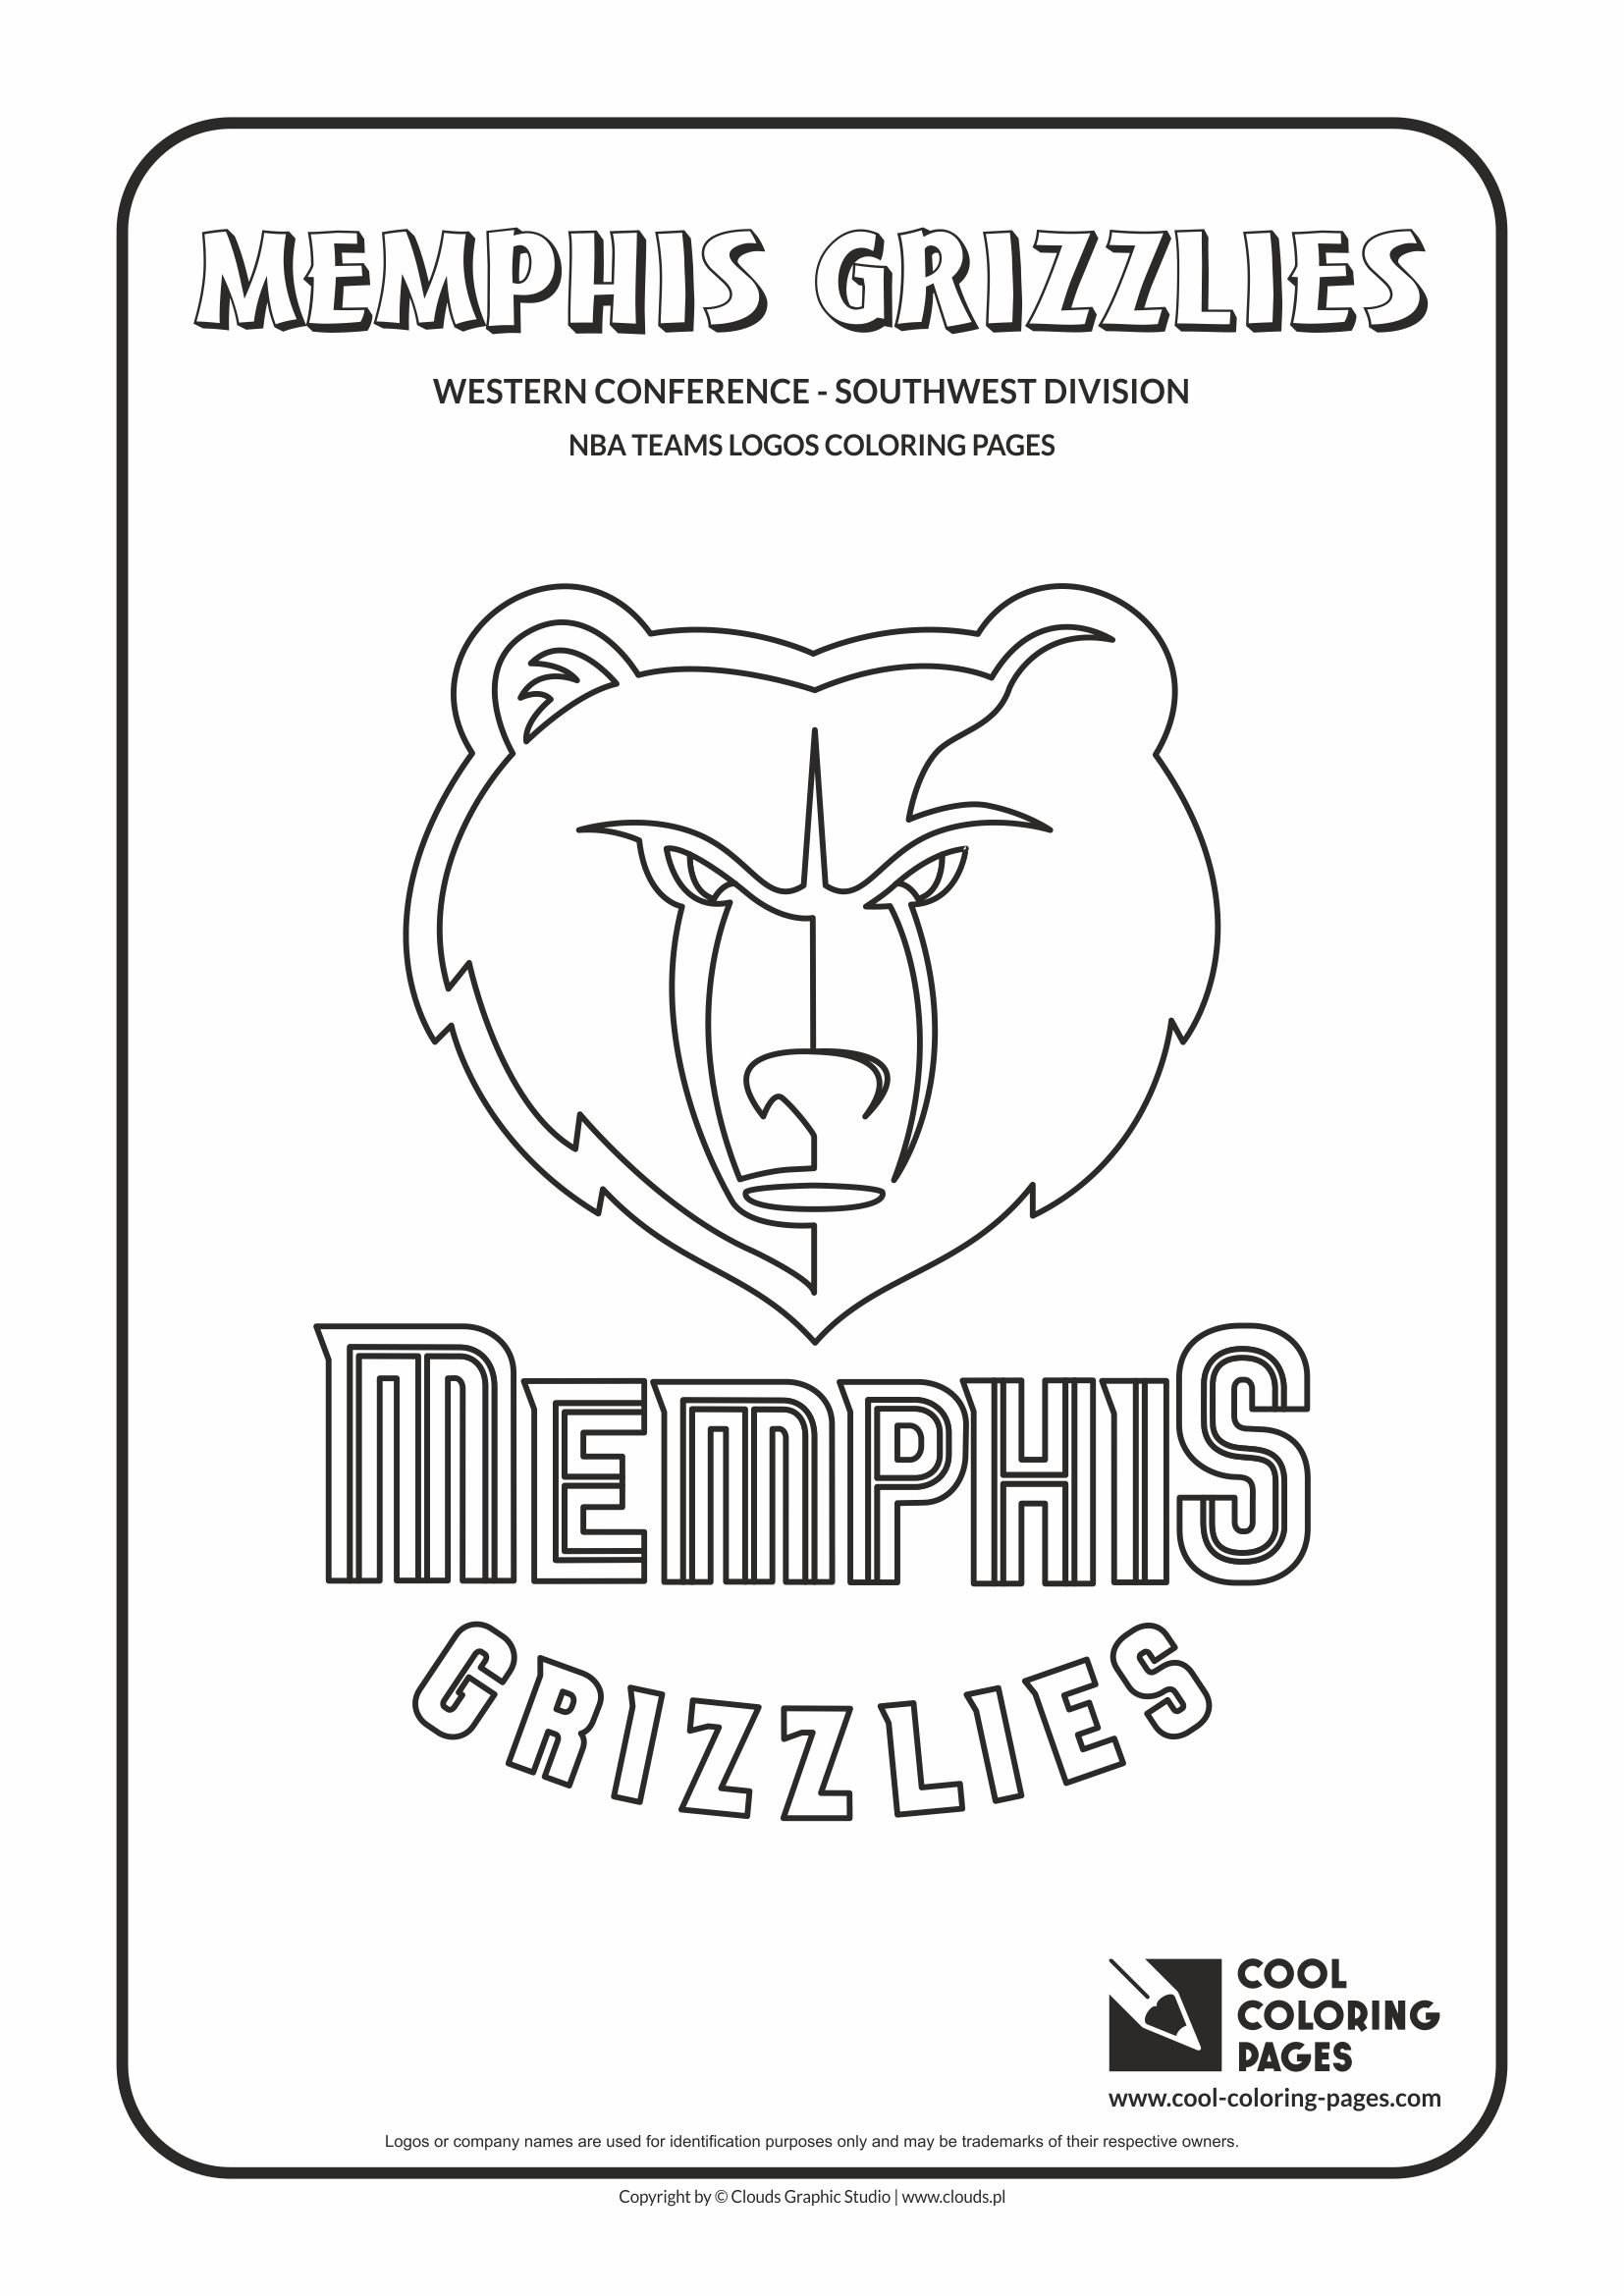 Cool Coloring Pages - NBA Basketball Clubs Logos - Western Conference - Southwest Division / Memphis Grizzlies logo / Coloring page with Memphis Grizzlies logo